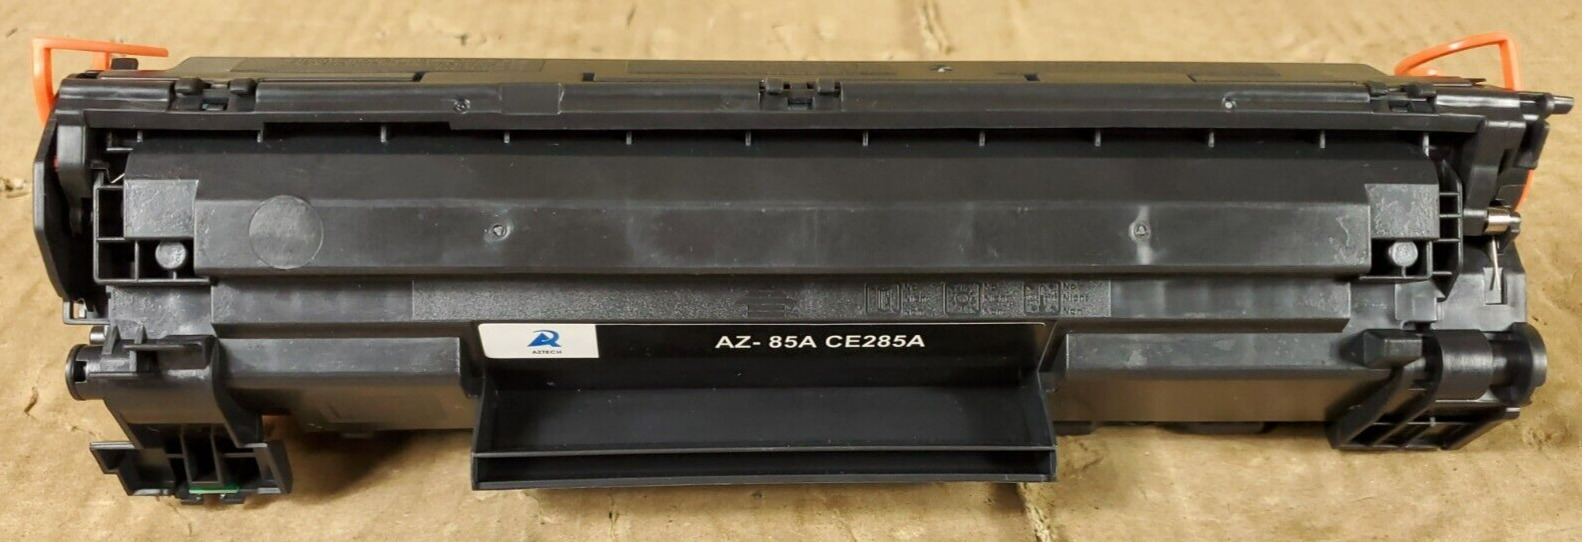 Aztech brand Toner Print Cartridge for HP Laser jet 85A CE285A New No Packaging